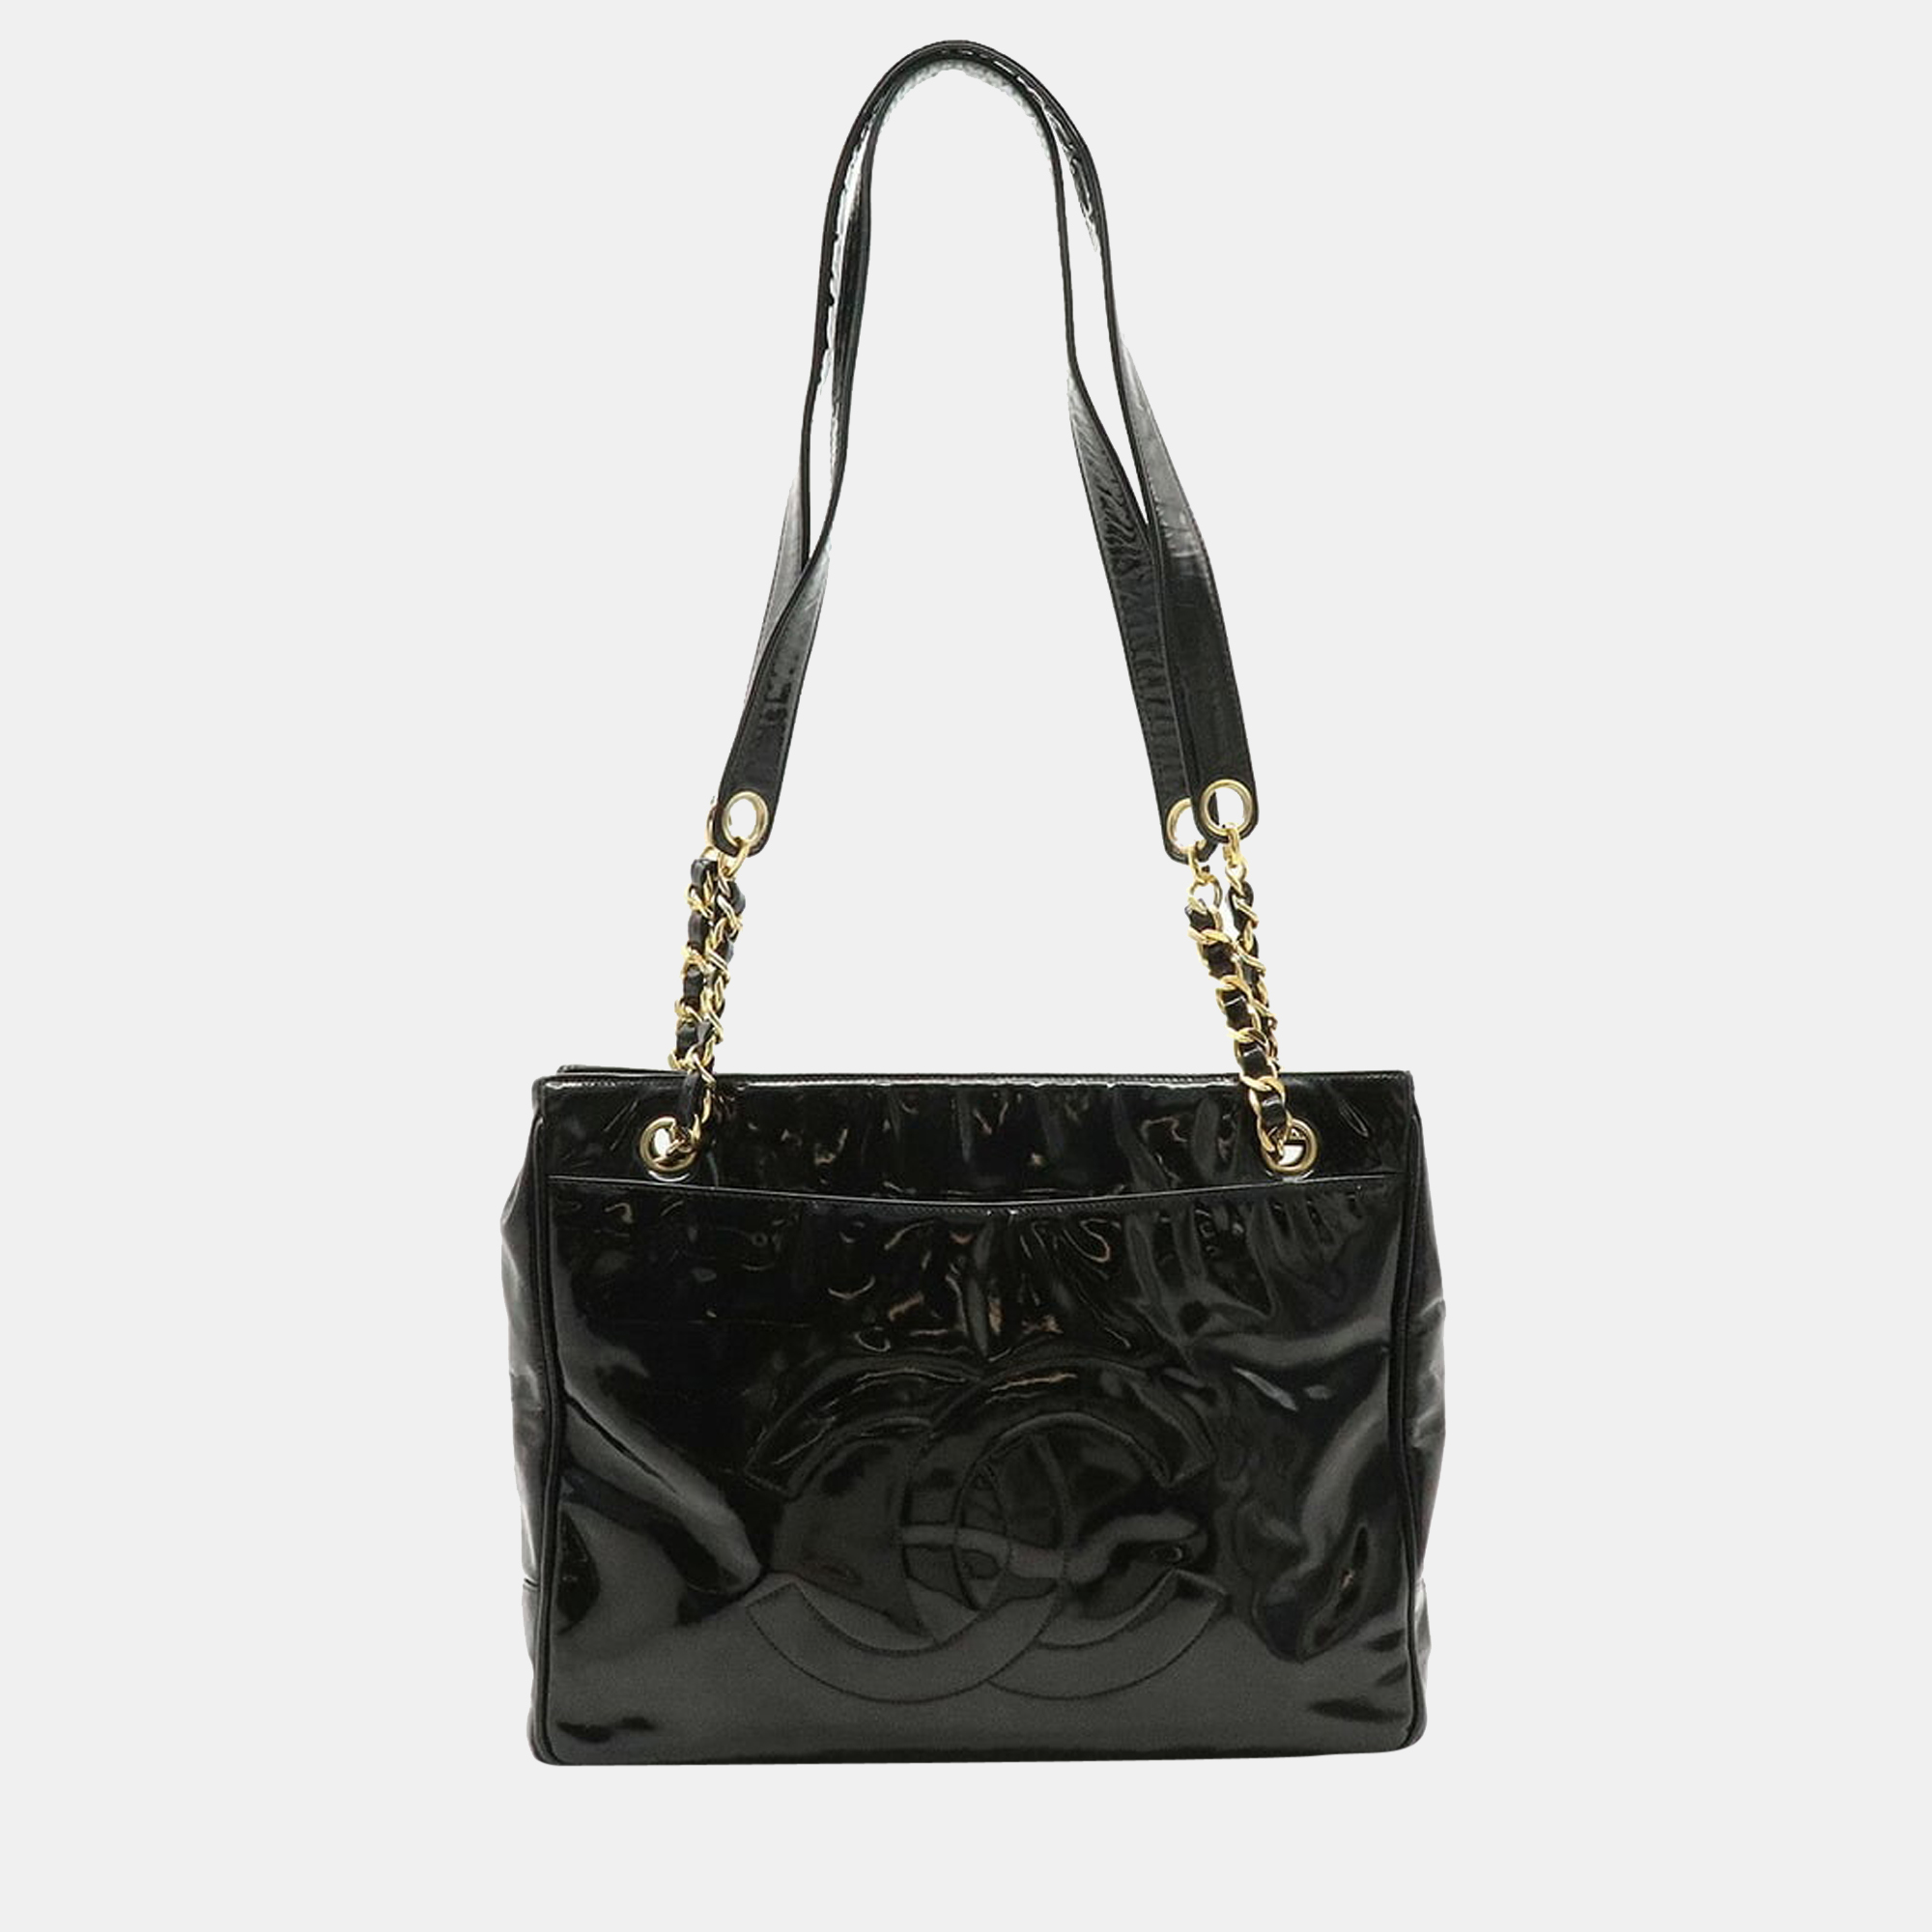 Pre-owned Chanel Black Patent Leather Cc Chain Tote Bag